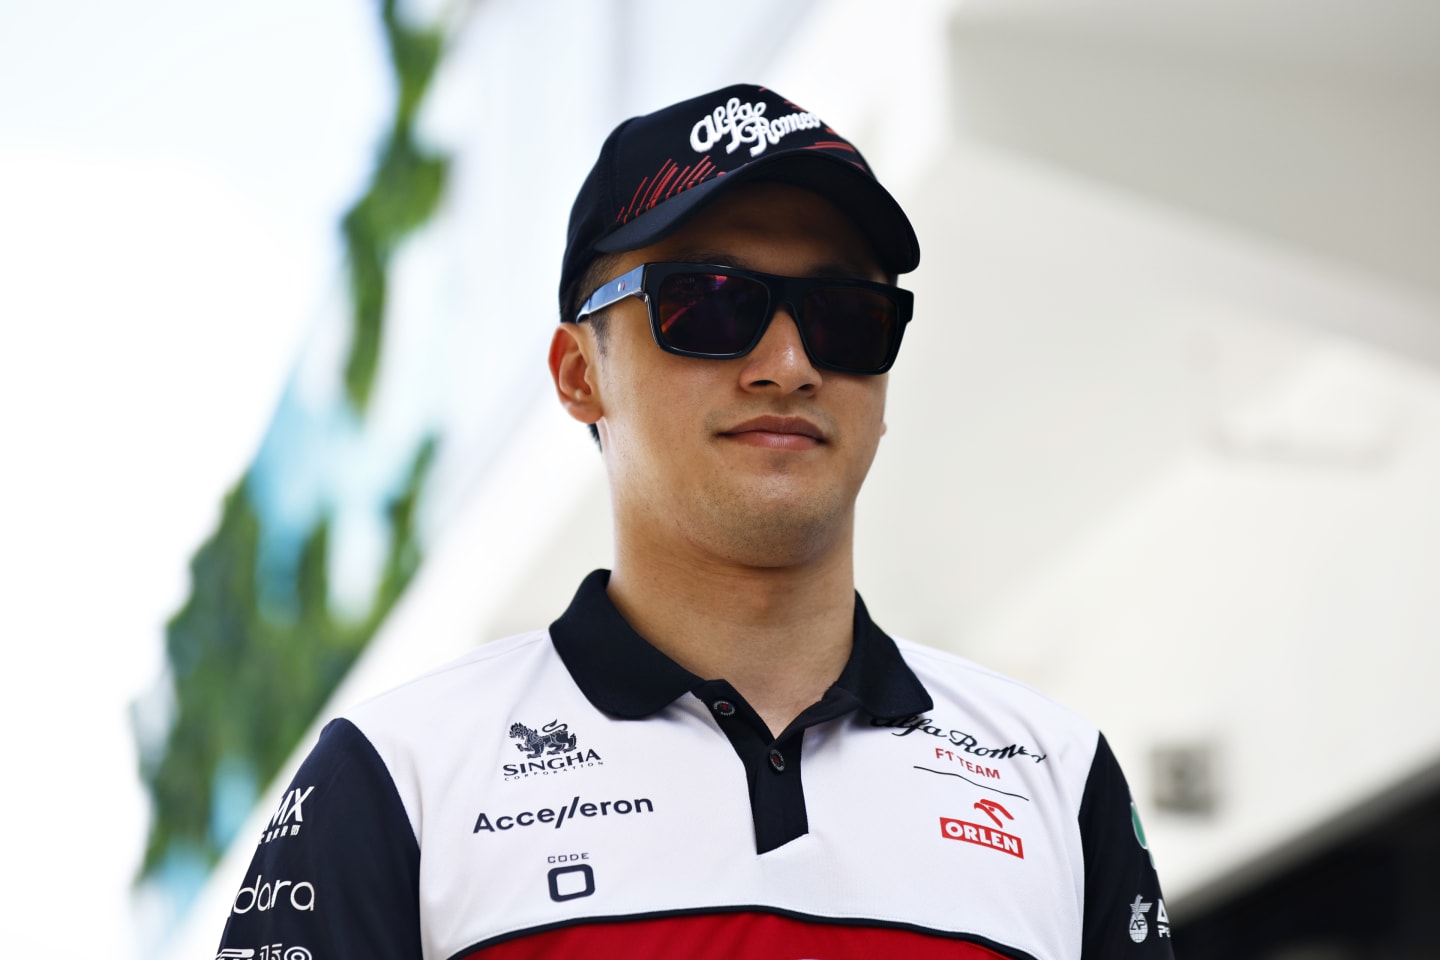 MIAMI, FLORIDA - MAY 08: Zhou Guanyu of China and Alfa Romeo F1 walks in the Paddock prior to the F1 Grand Prix of Miami at the Miami International Autodrome on May 08, 2022 in Miami, Florida. (Photo by Jared C. Tilton/Getty Images)